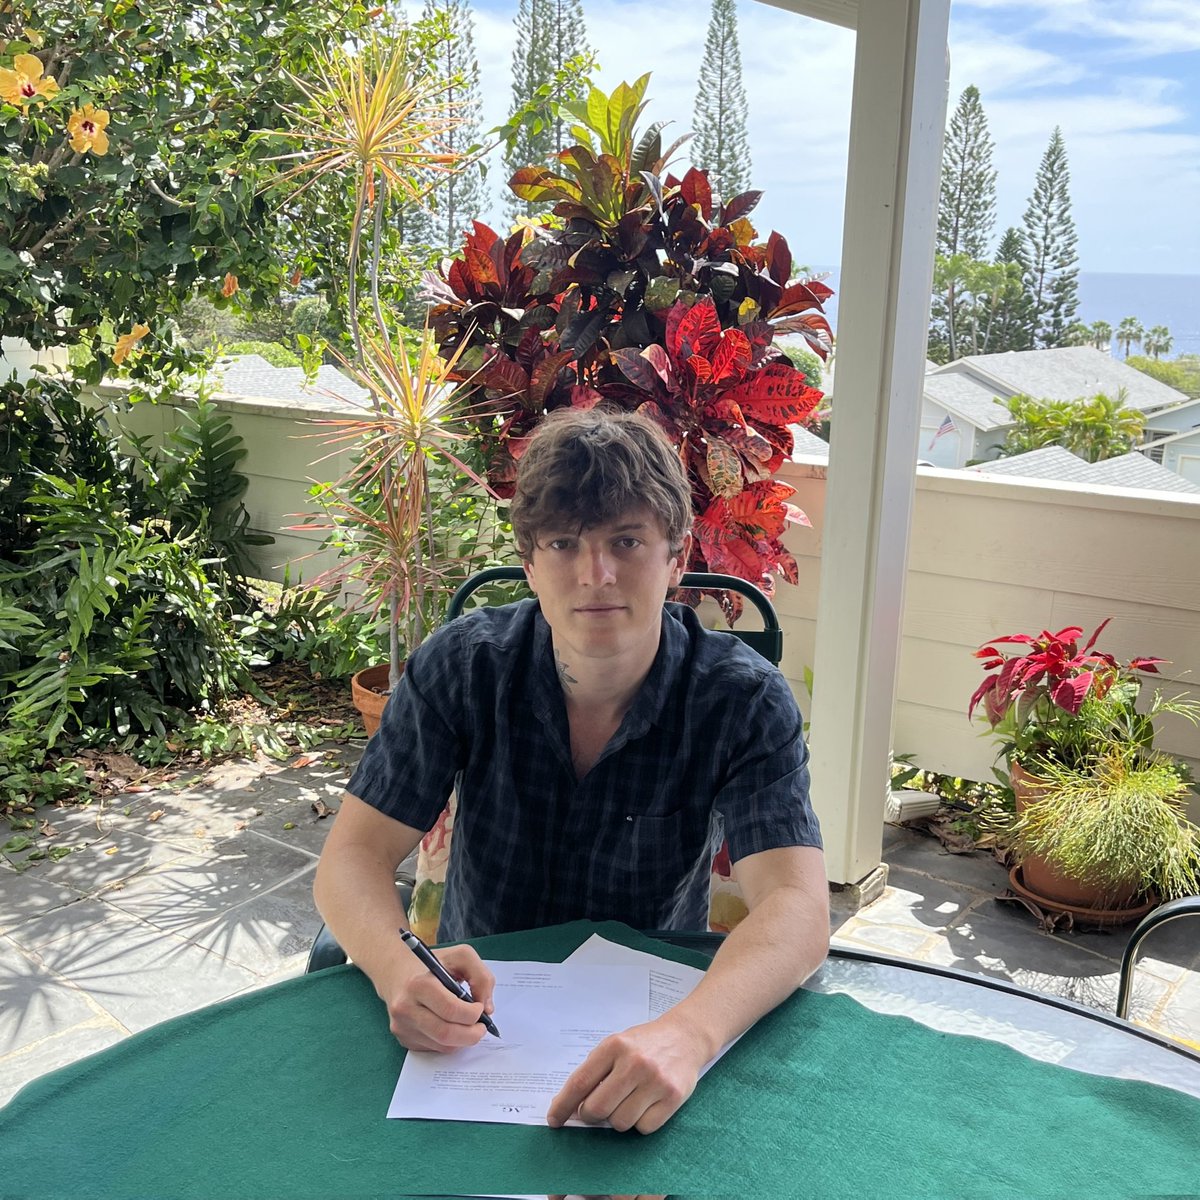 Welcome Johnathon Bicknell to our family!

Born in Hawaii, USA, in 1999, he has spent the last three seasons between the United States, Costa Rica and Romania. A winger, he makes technique and speed his best qualities in both flanks.

#sportforall with #agsportsagencyllc